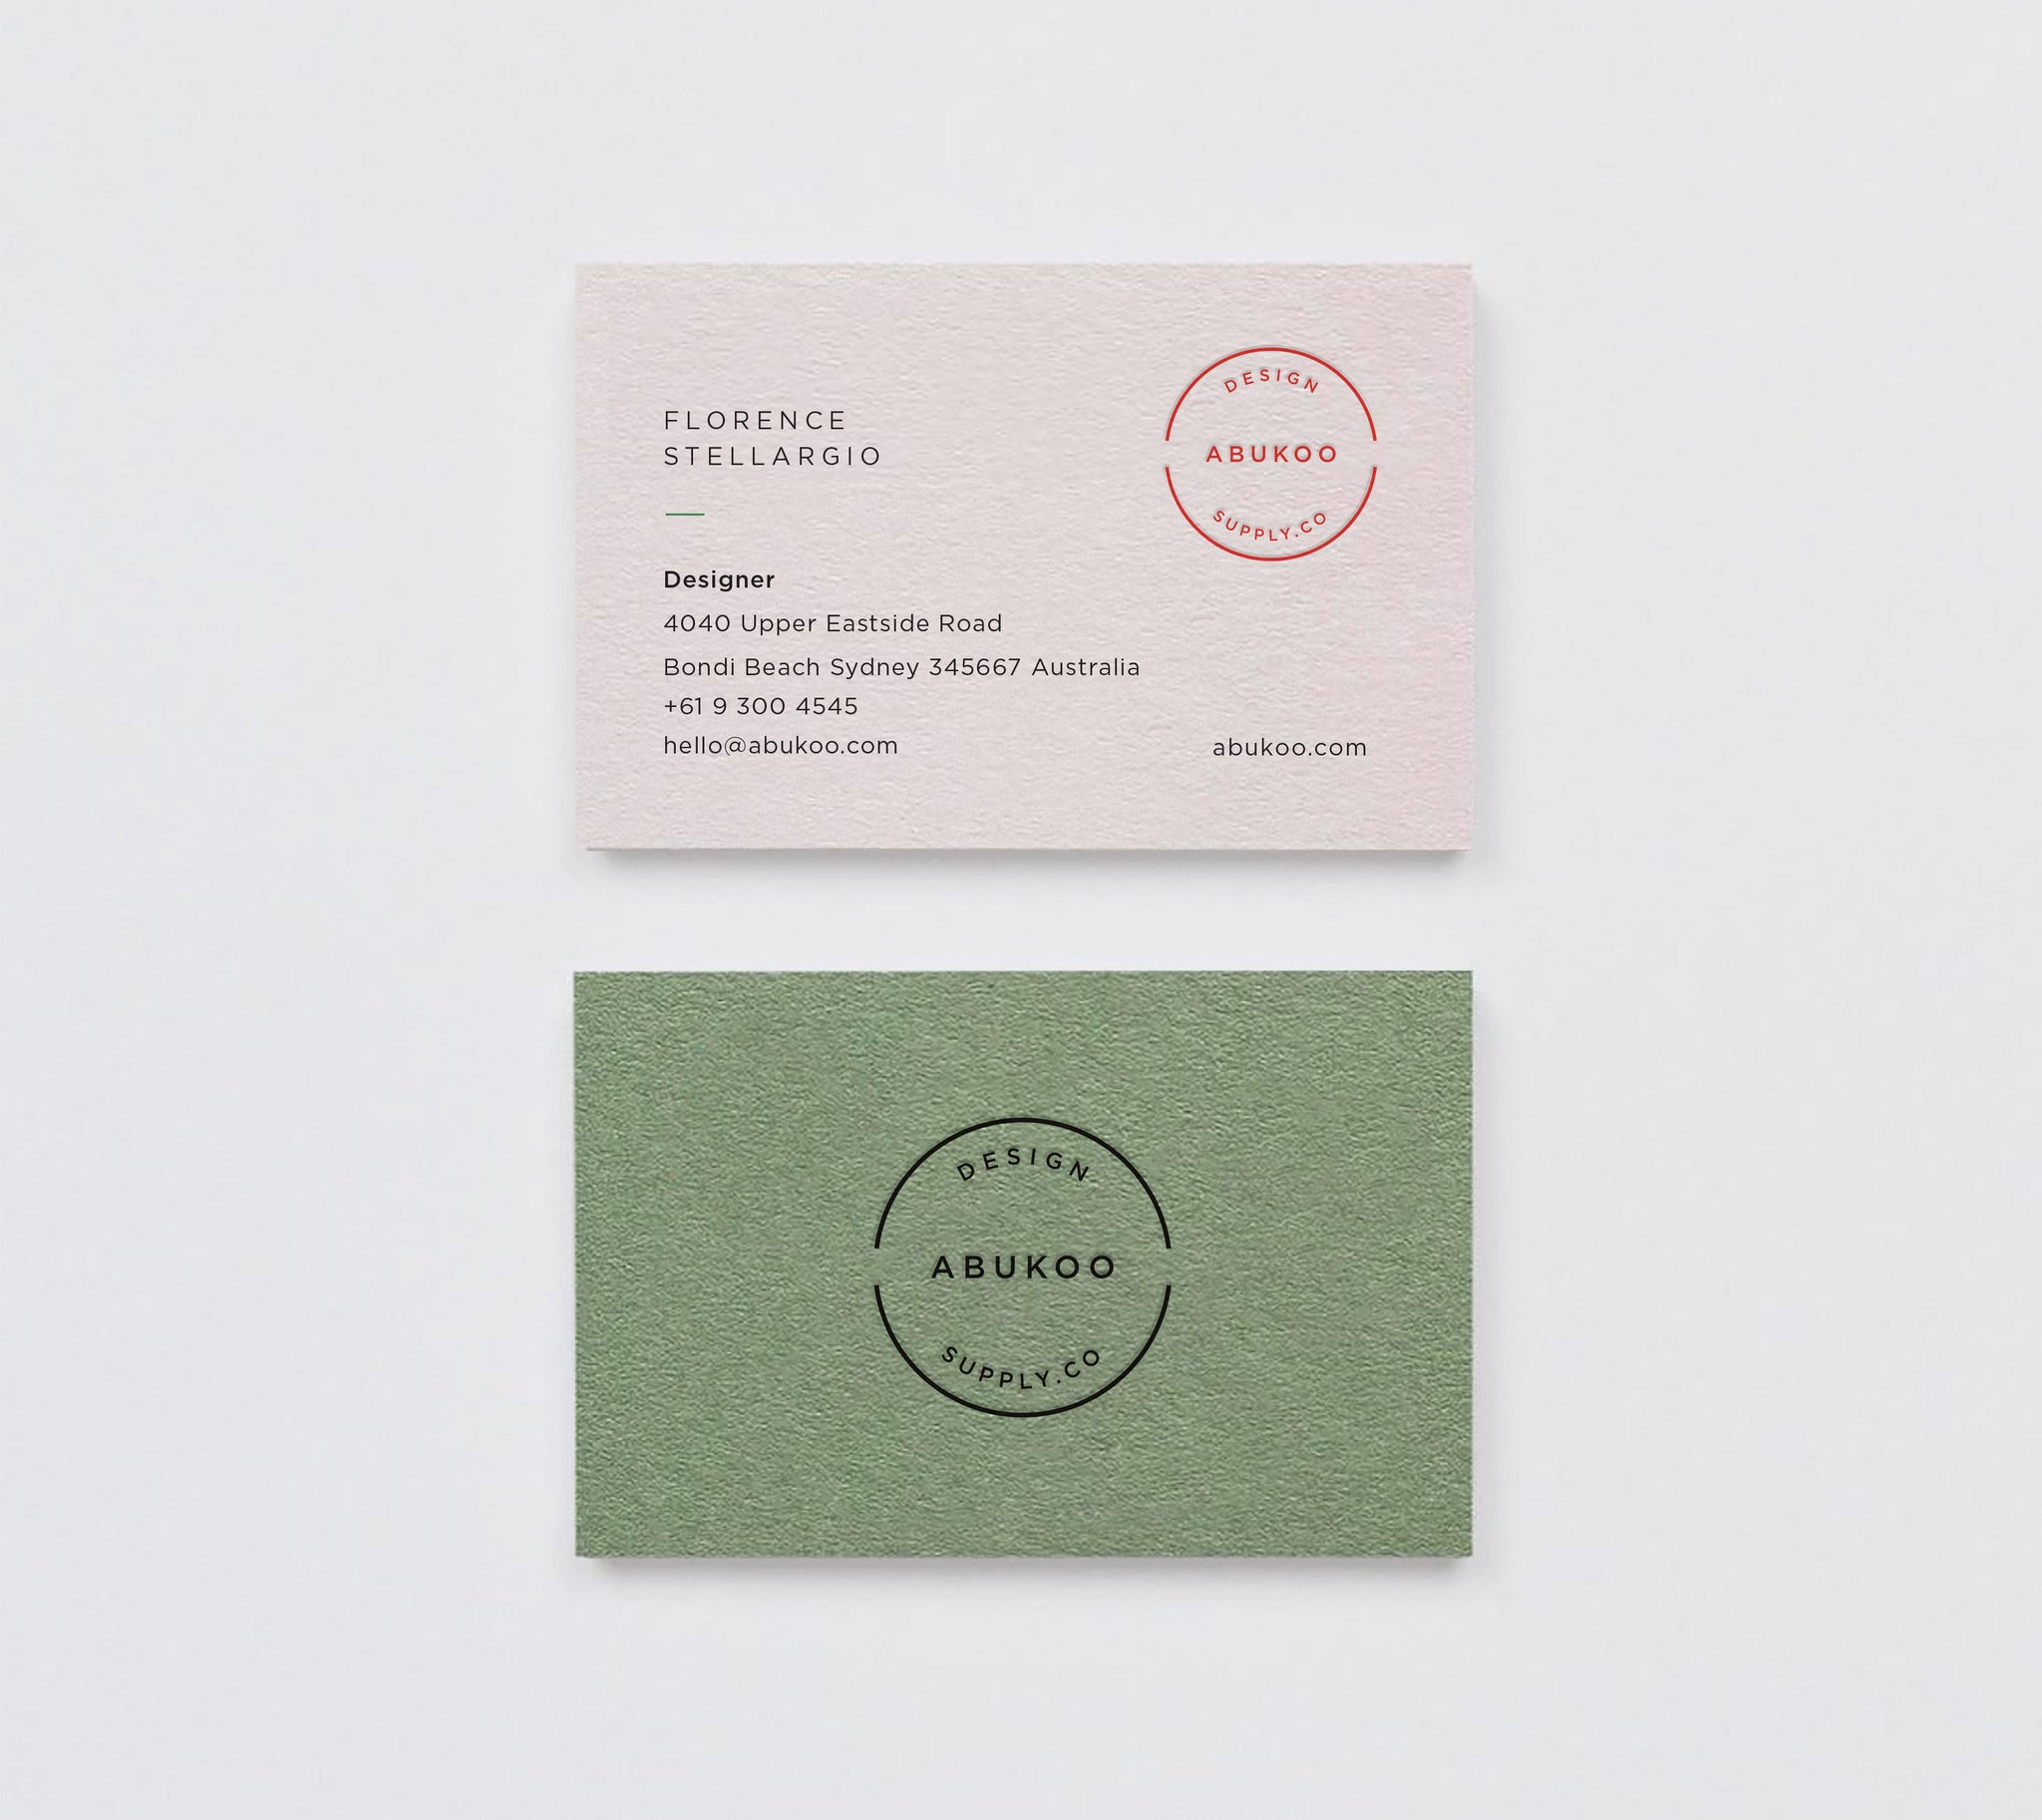 Minimal business card design and visual identity for Abukoo